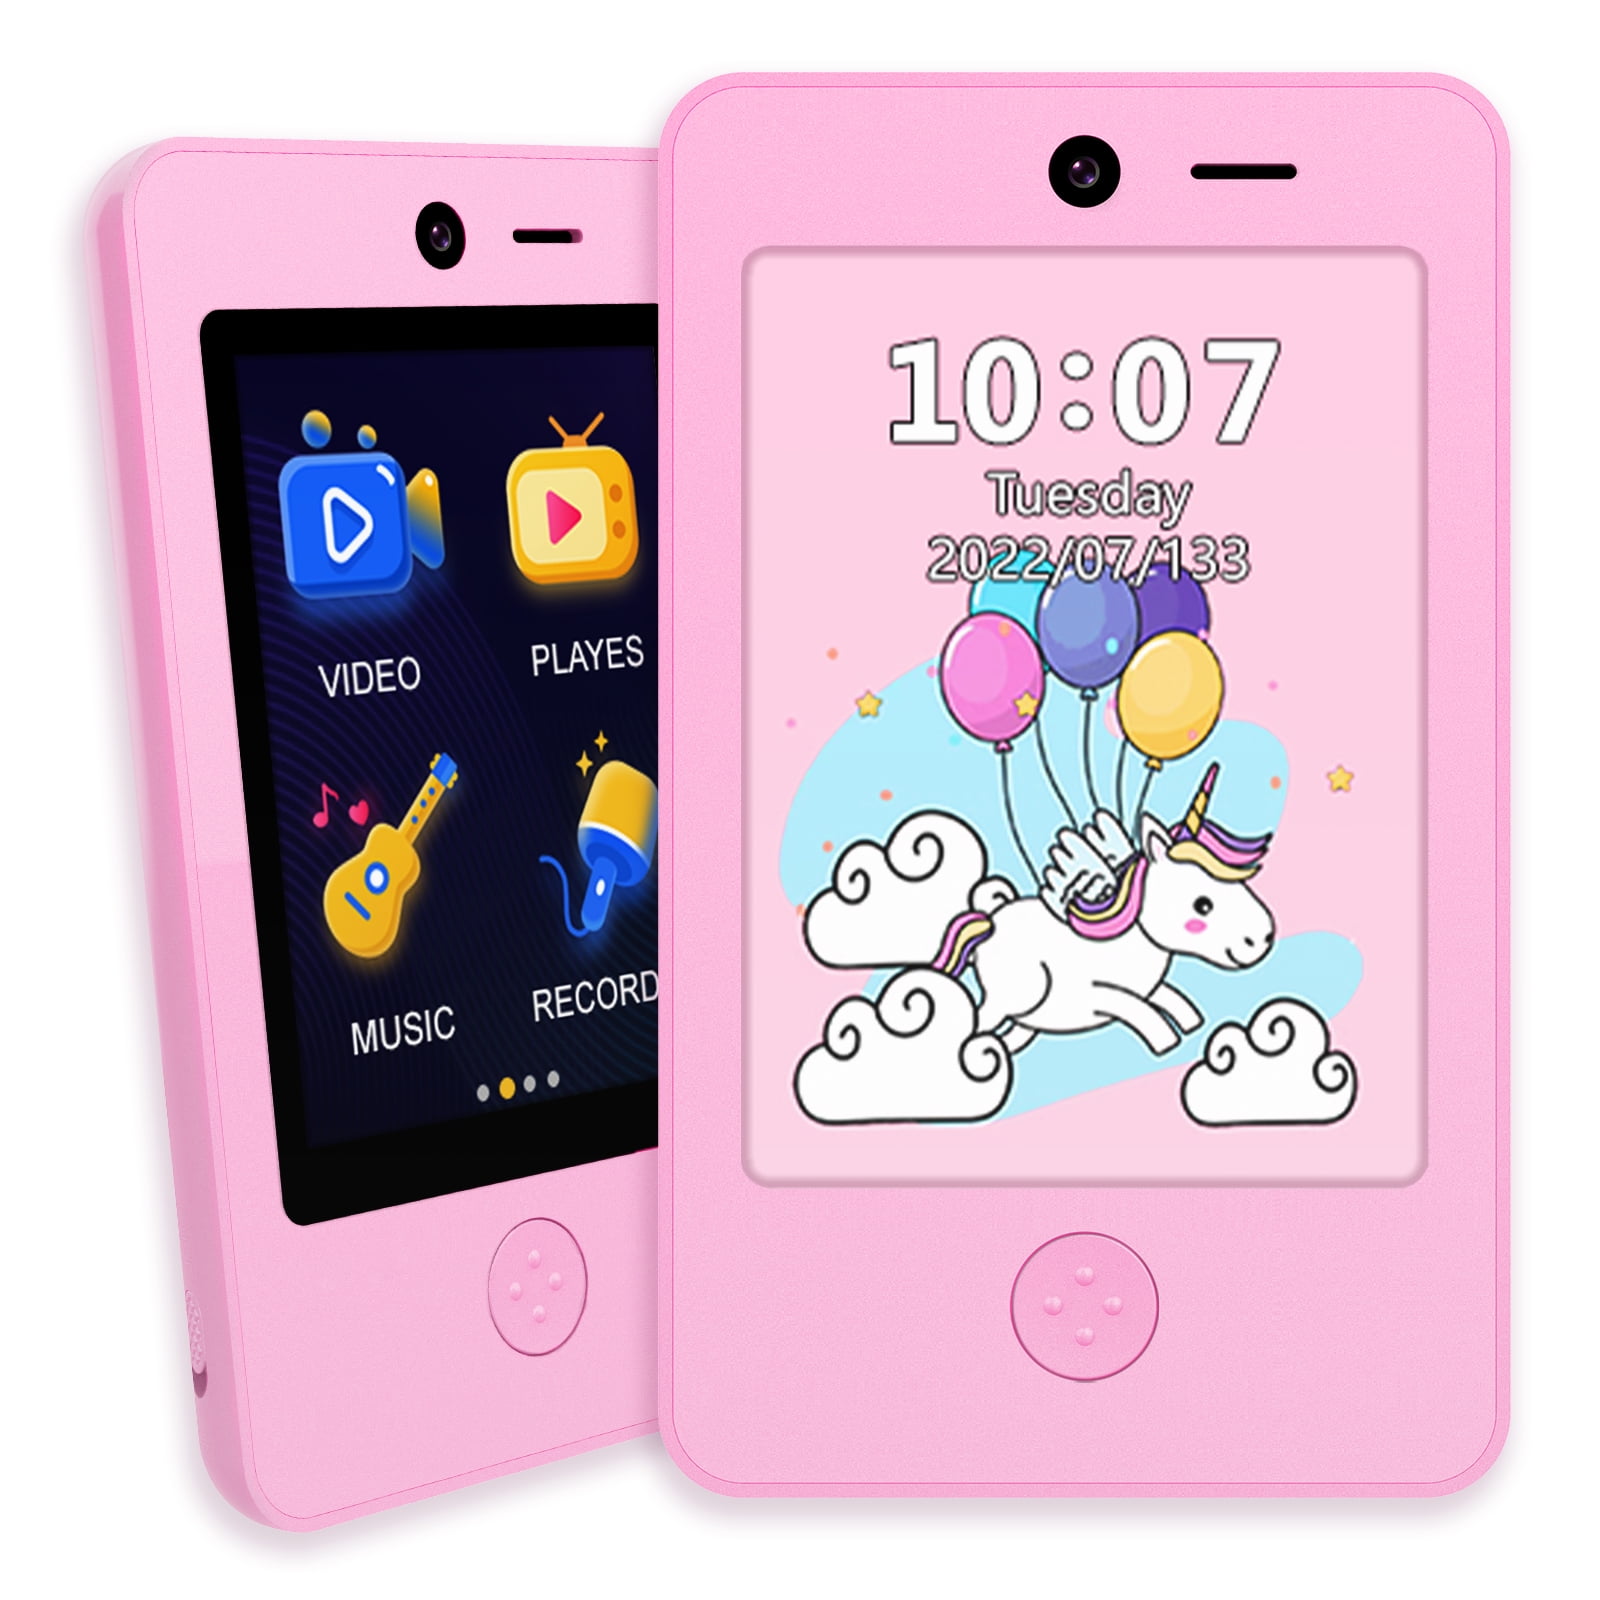 Kids Phone Girls,Touch Screen MP3 Player for with 2 Games Alarm Clock,Phones for Kids Cell Phone Toddler Learning Toys Birthday Gifts for Children Ages 3 4 5 6 7 8 - Walmart.com